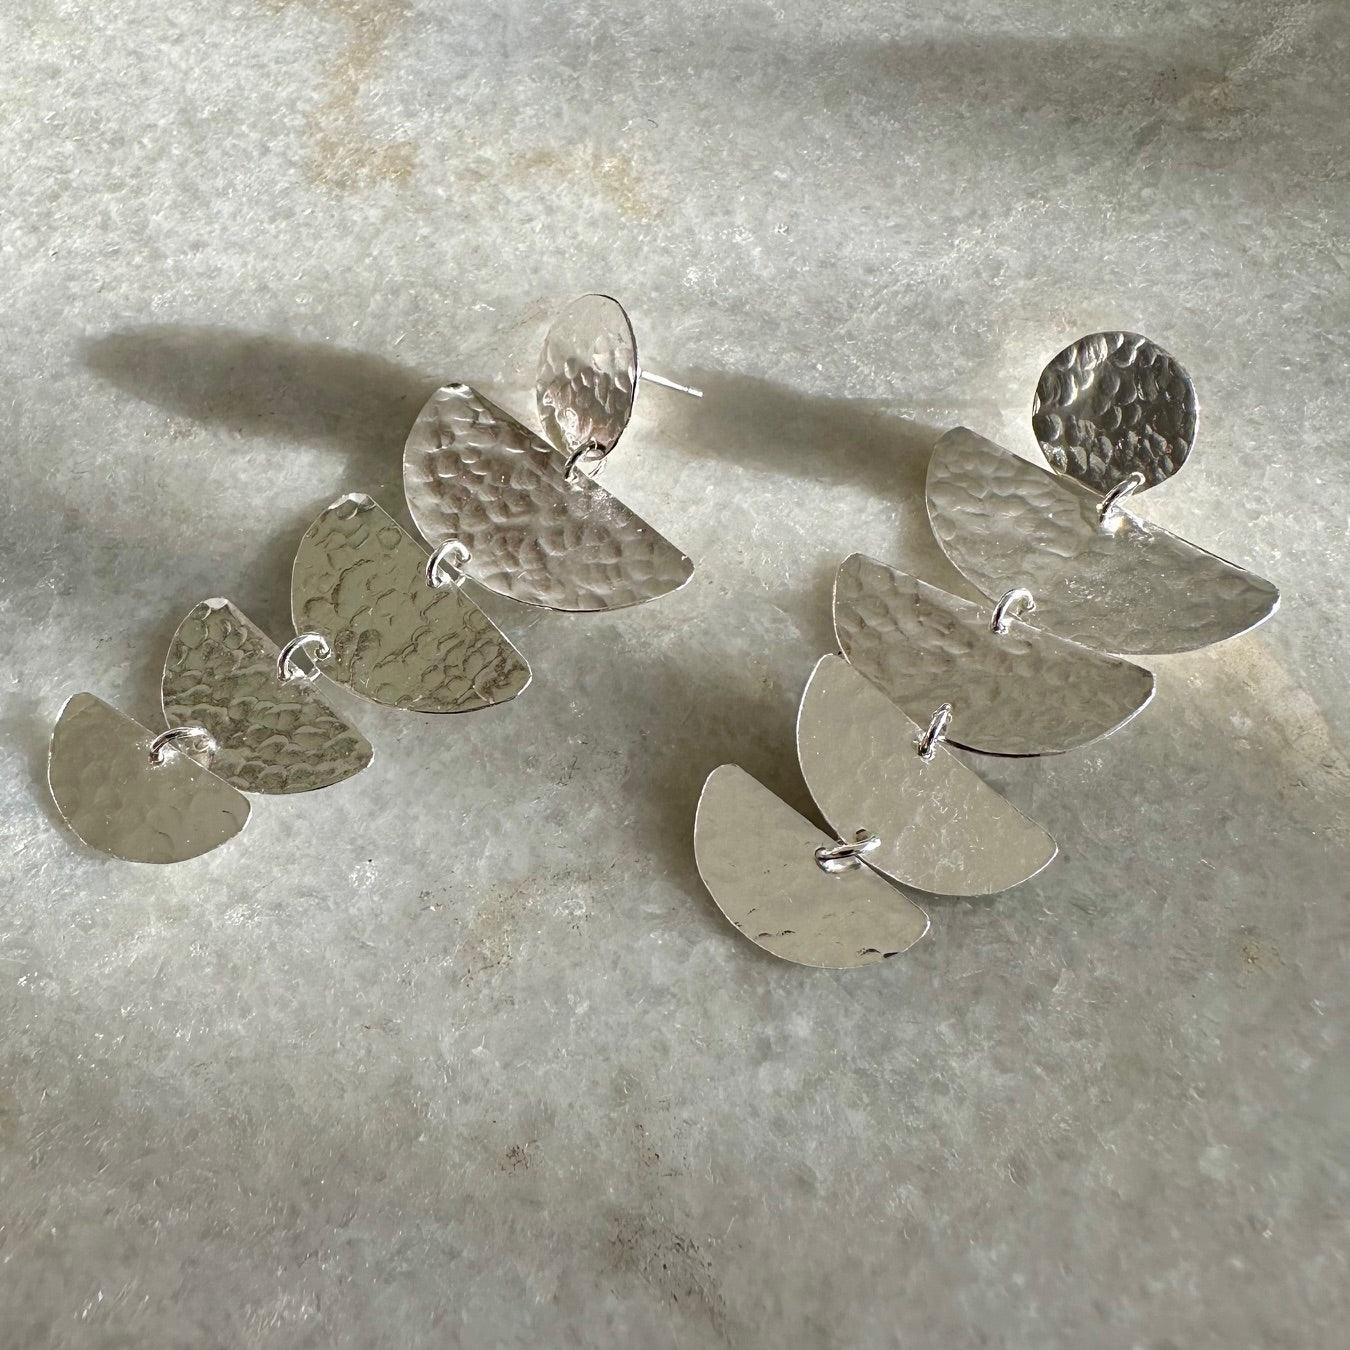 Bella Earrings: handmade with four graduated half moon shapes in recycled silver hanging from a silver disc.